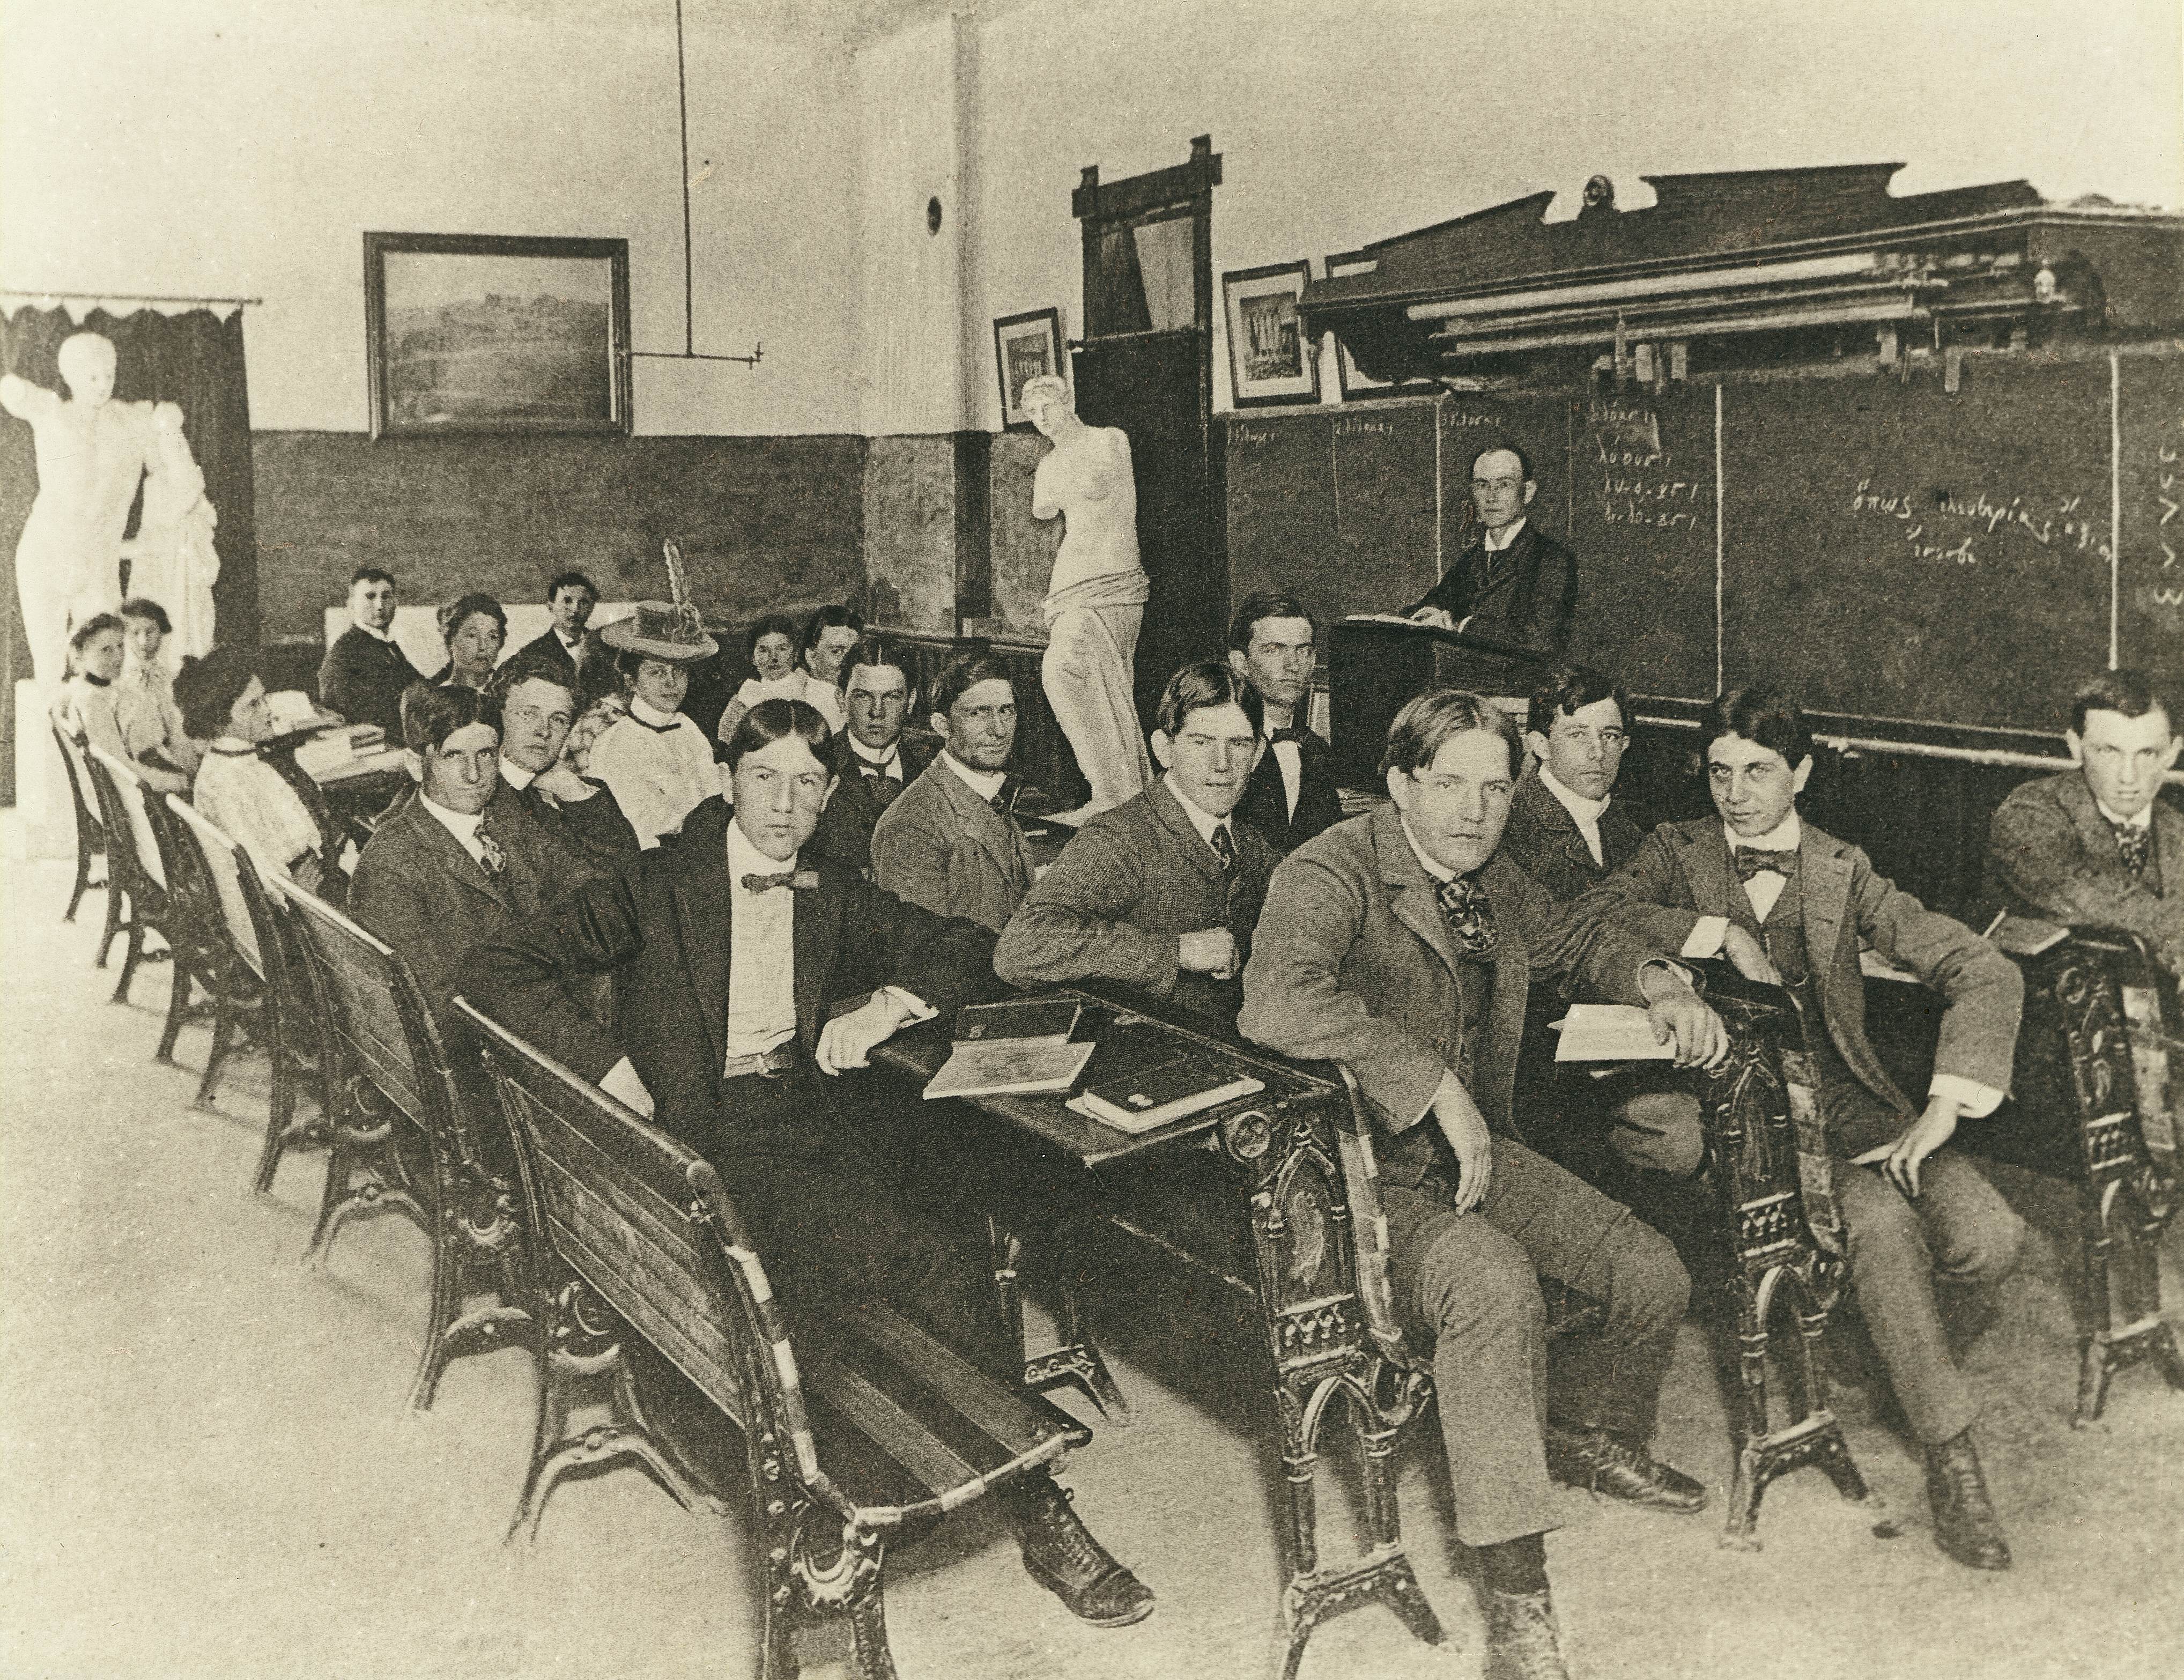 William J. Battle in a classroom with students and some of the casts